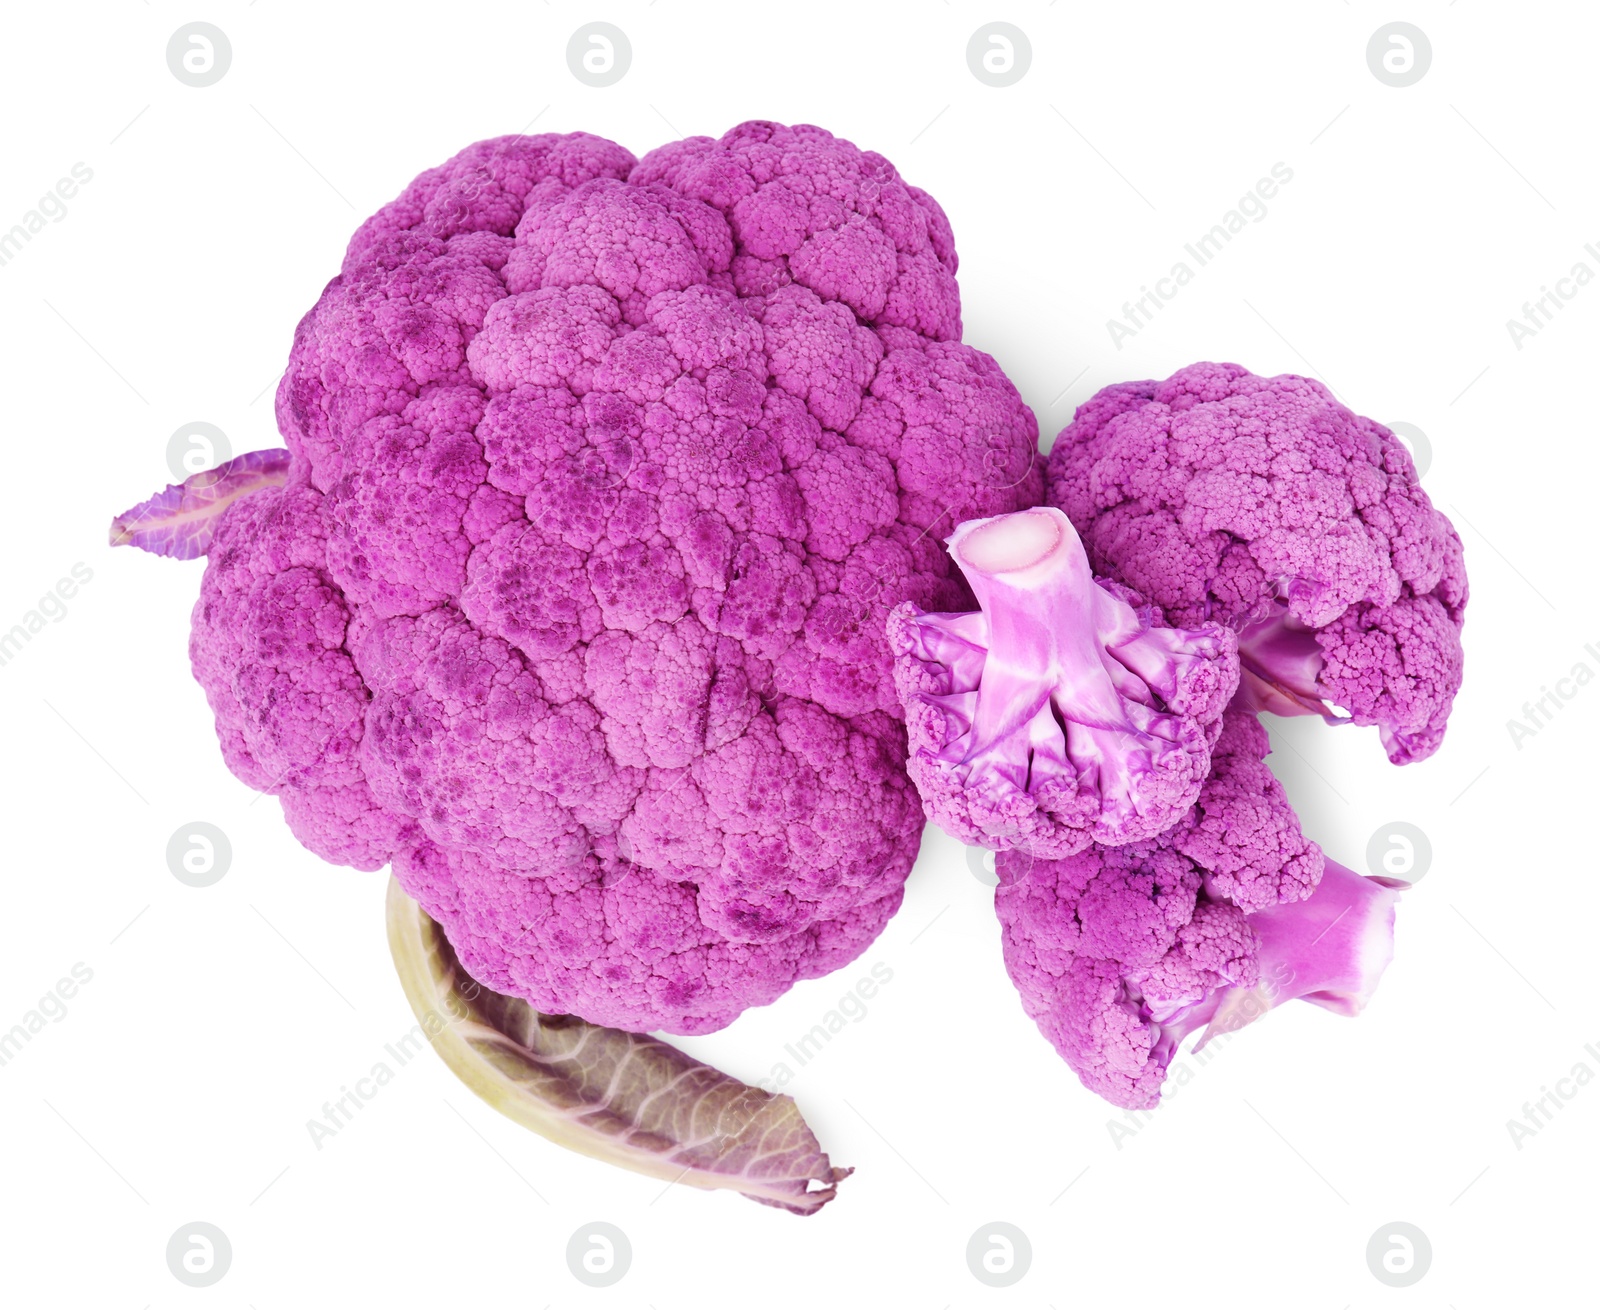 Photo of Cut purple cauliflowers on white background, top view. Healthy food